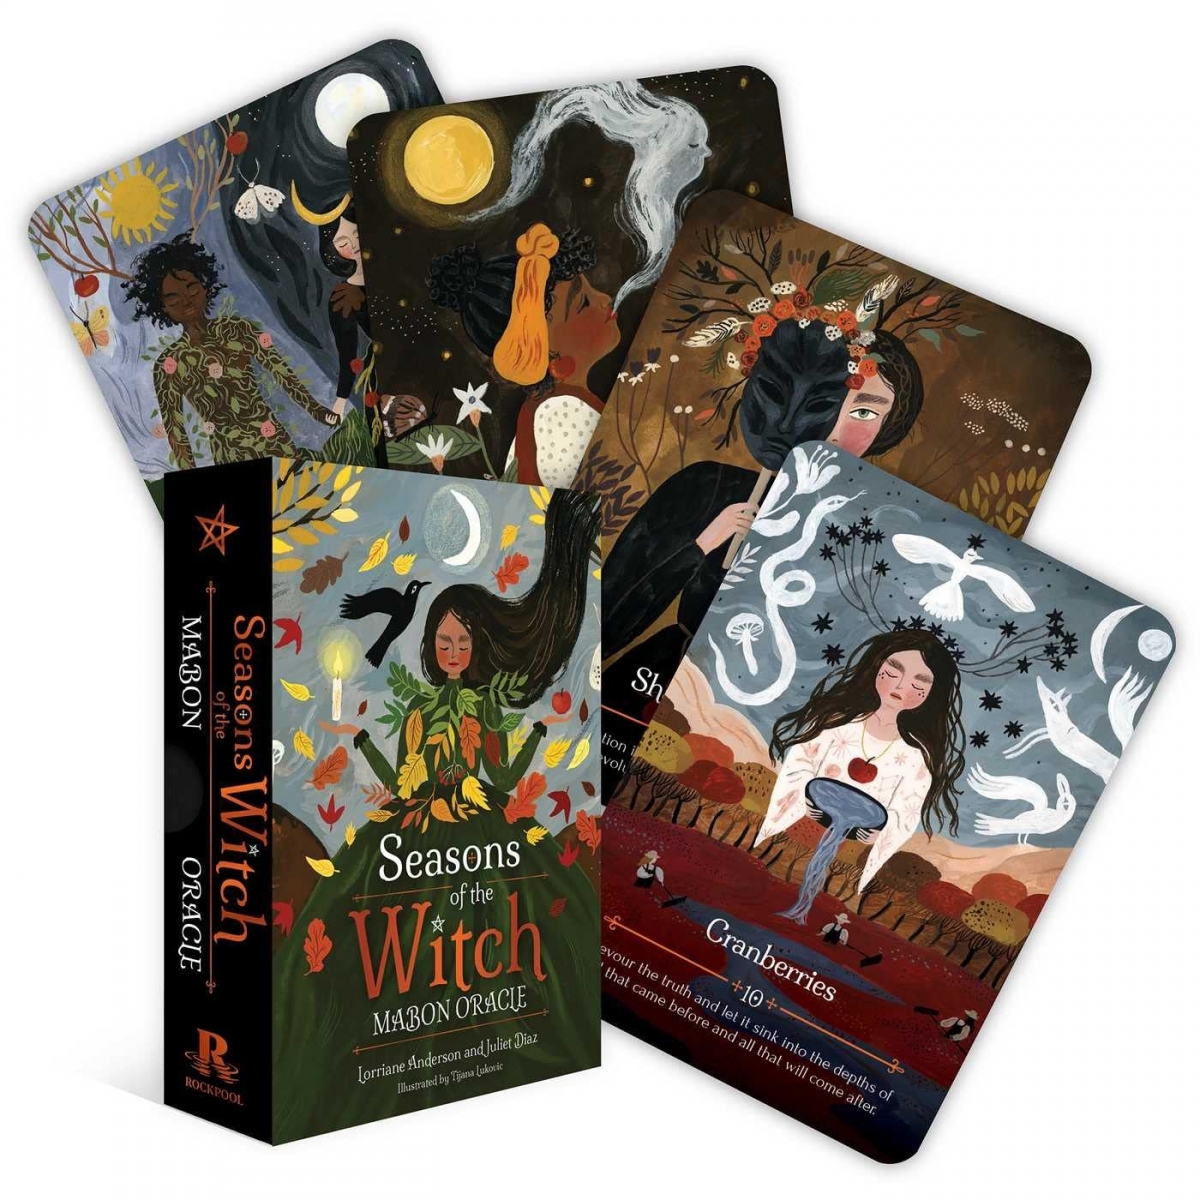 Anderson, Lorriane ; Diaz, Juliet ; Lukovic, Tijan Seasons of the Witch - Mabon Oracle: (44 Gilded Cards and 144-Page Full-Color Guidebook) 